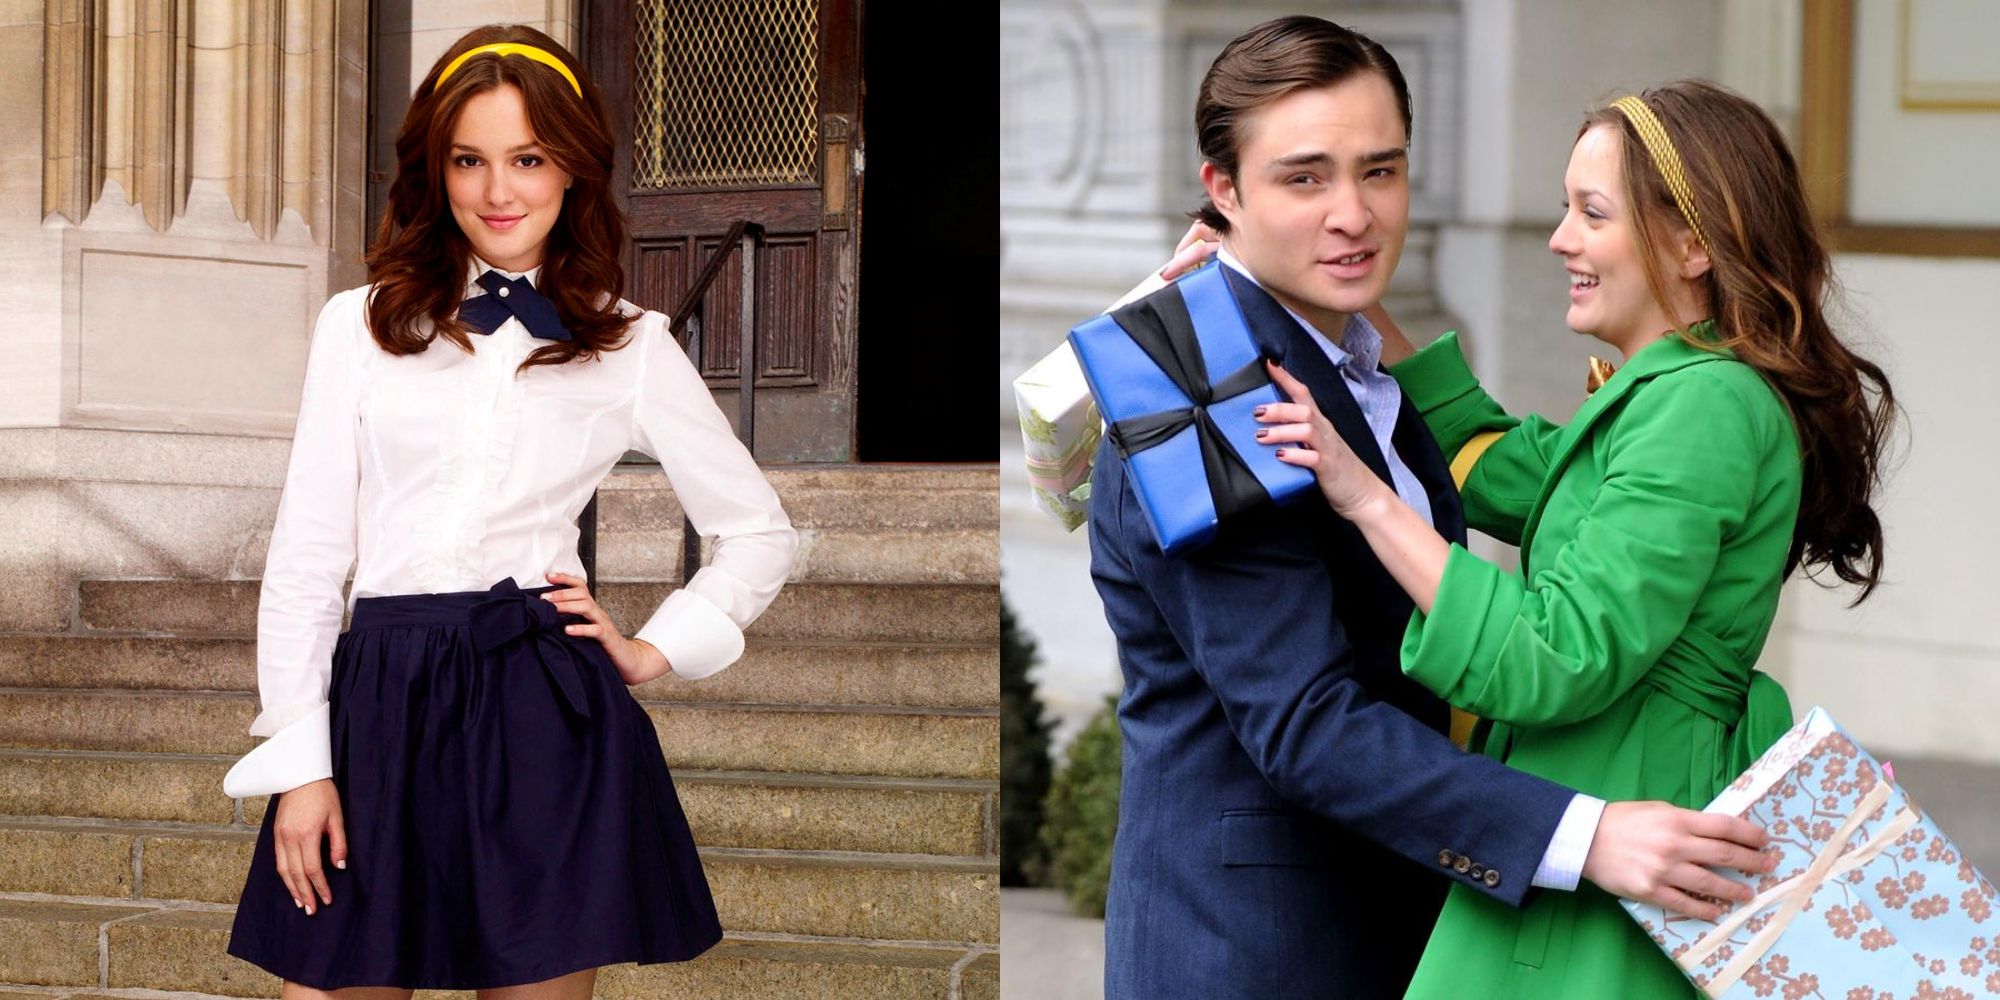 Gossip Girl: 10 Differences Between Blair In The Books & The TV Show